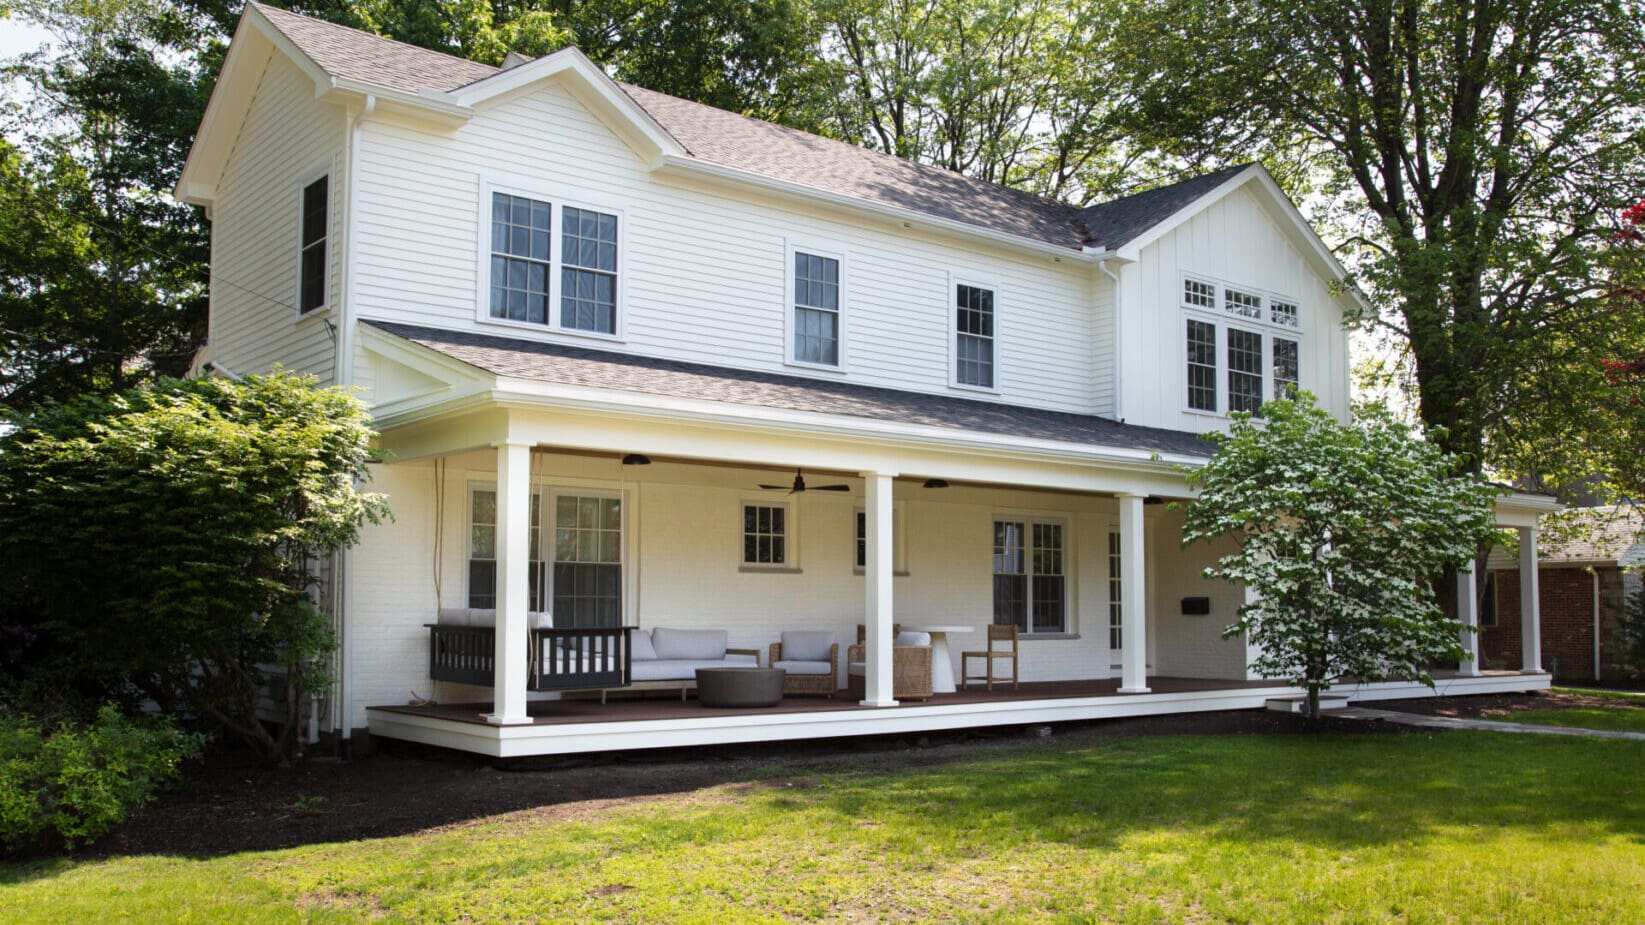 A photo of a white two-level house with a farmers porch with white square pillars, dark brown wooden flooring, and assorted outdoor furniture with grey cushions.